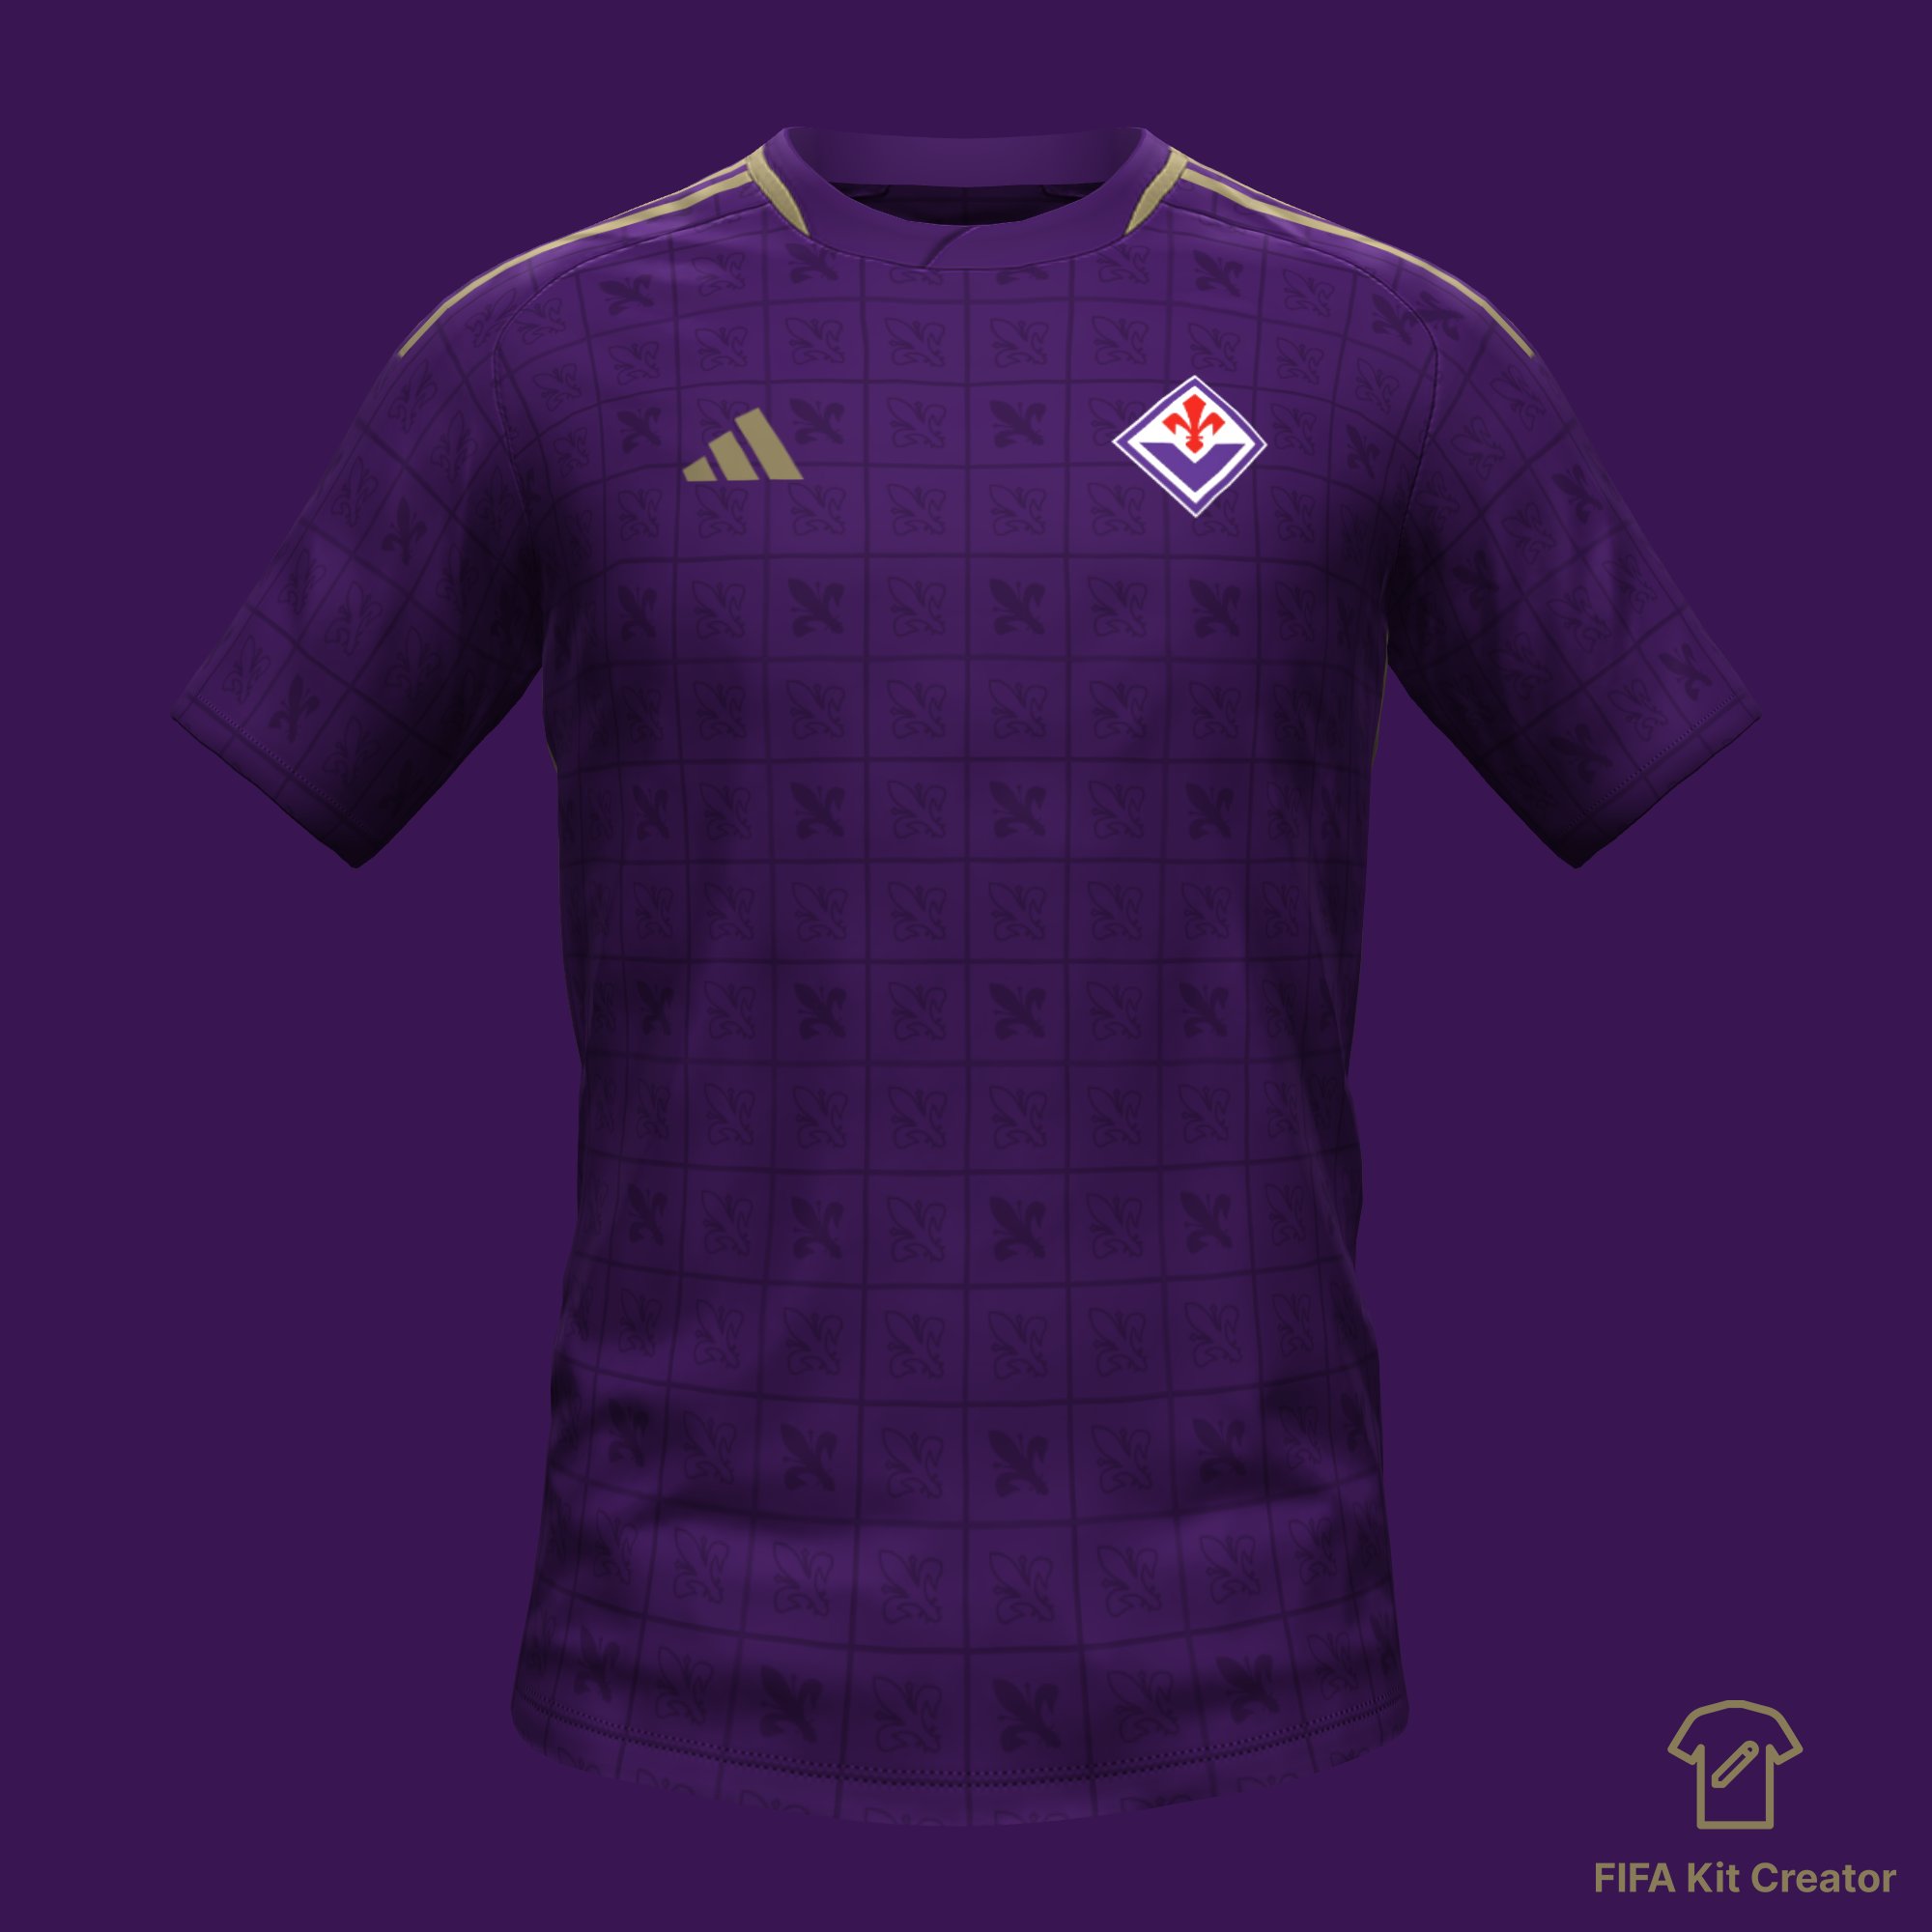 FIFA Kit Creator on Twitter: New template: Adidas Coming July 8 ☑ https://t.co/qC4xvruoFp" / Twitter